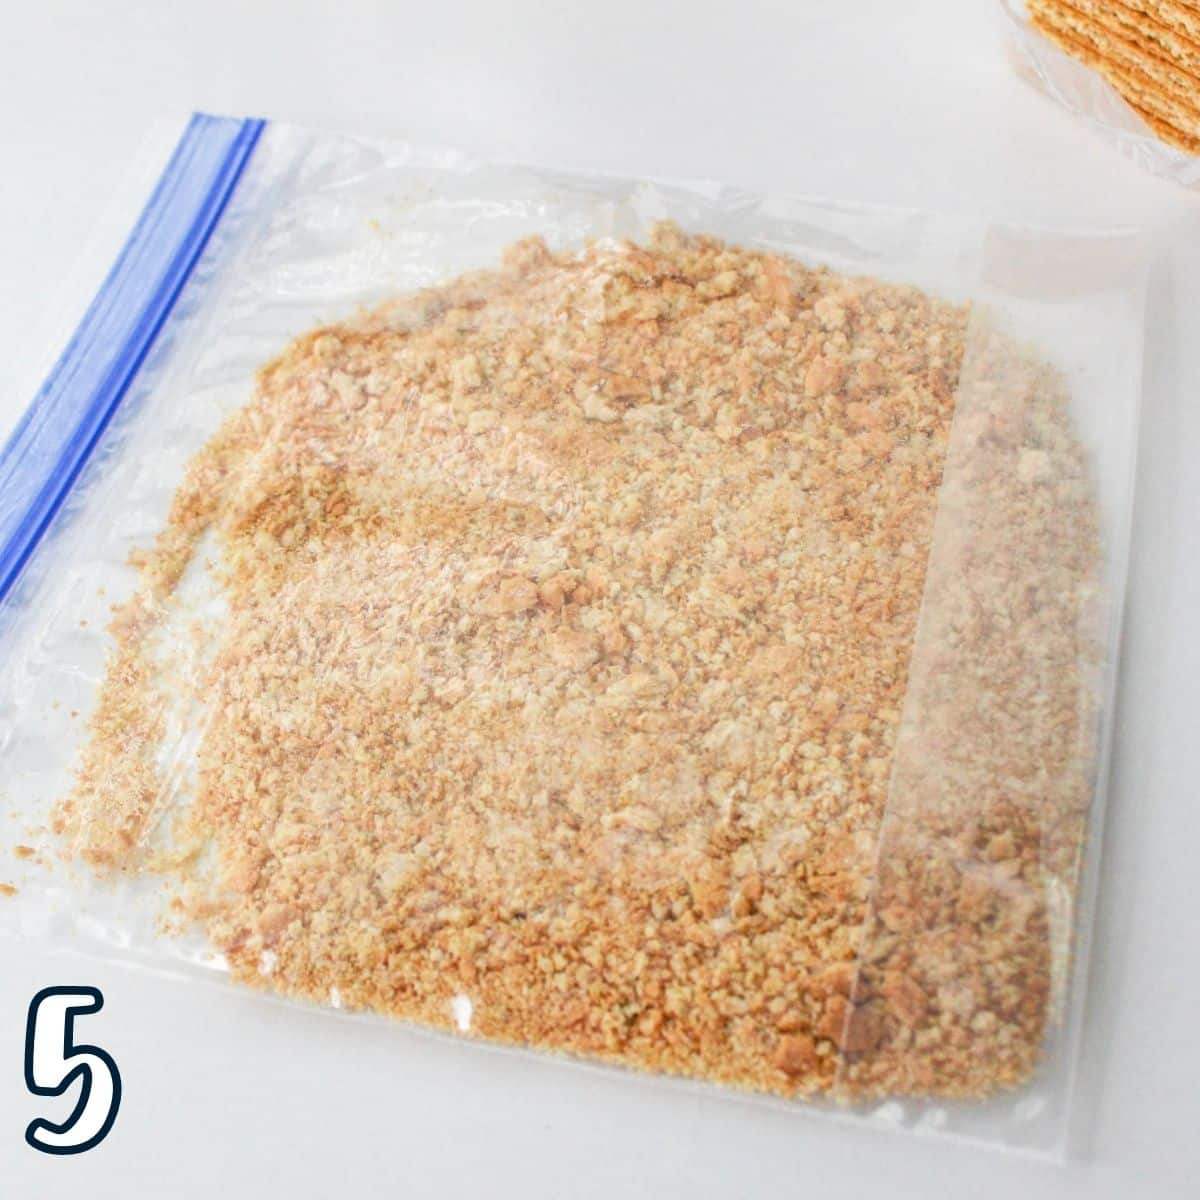 Crushed graham crackers in a plastic bag. 